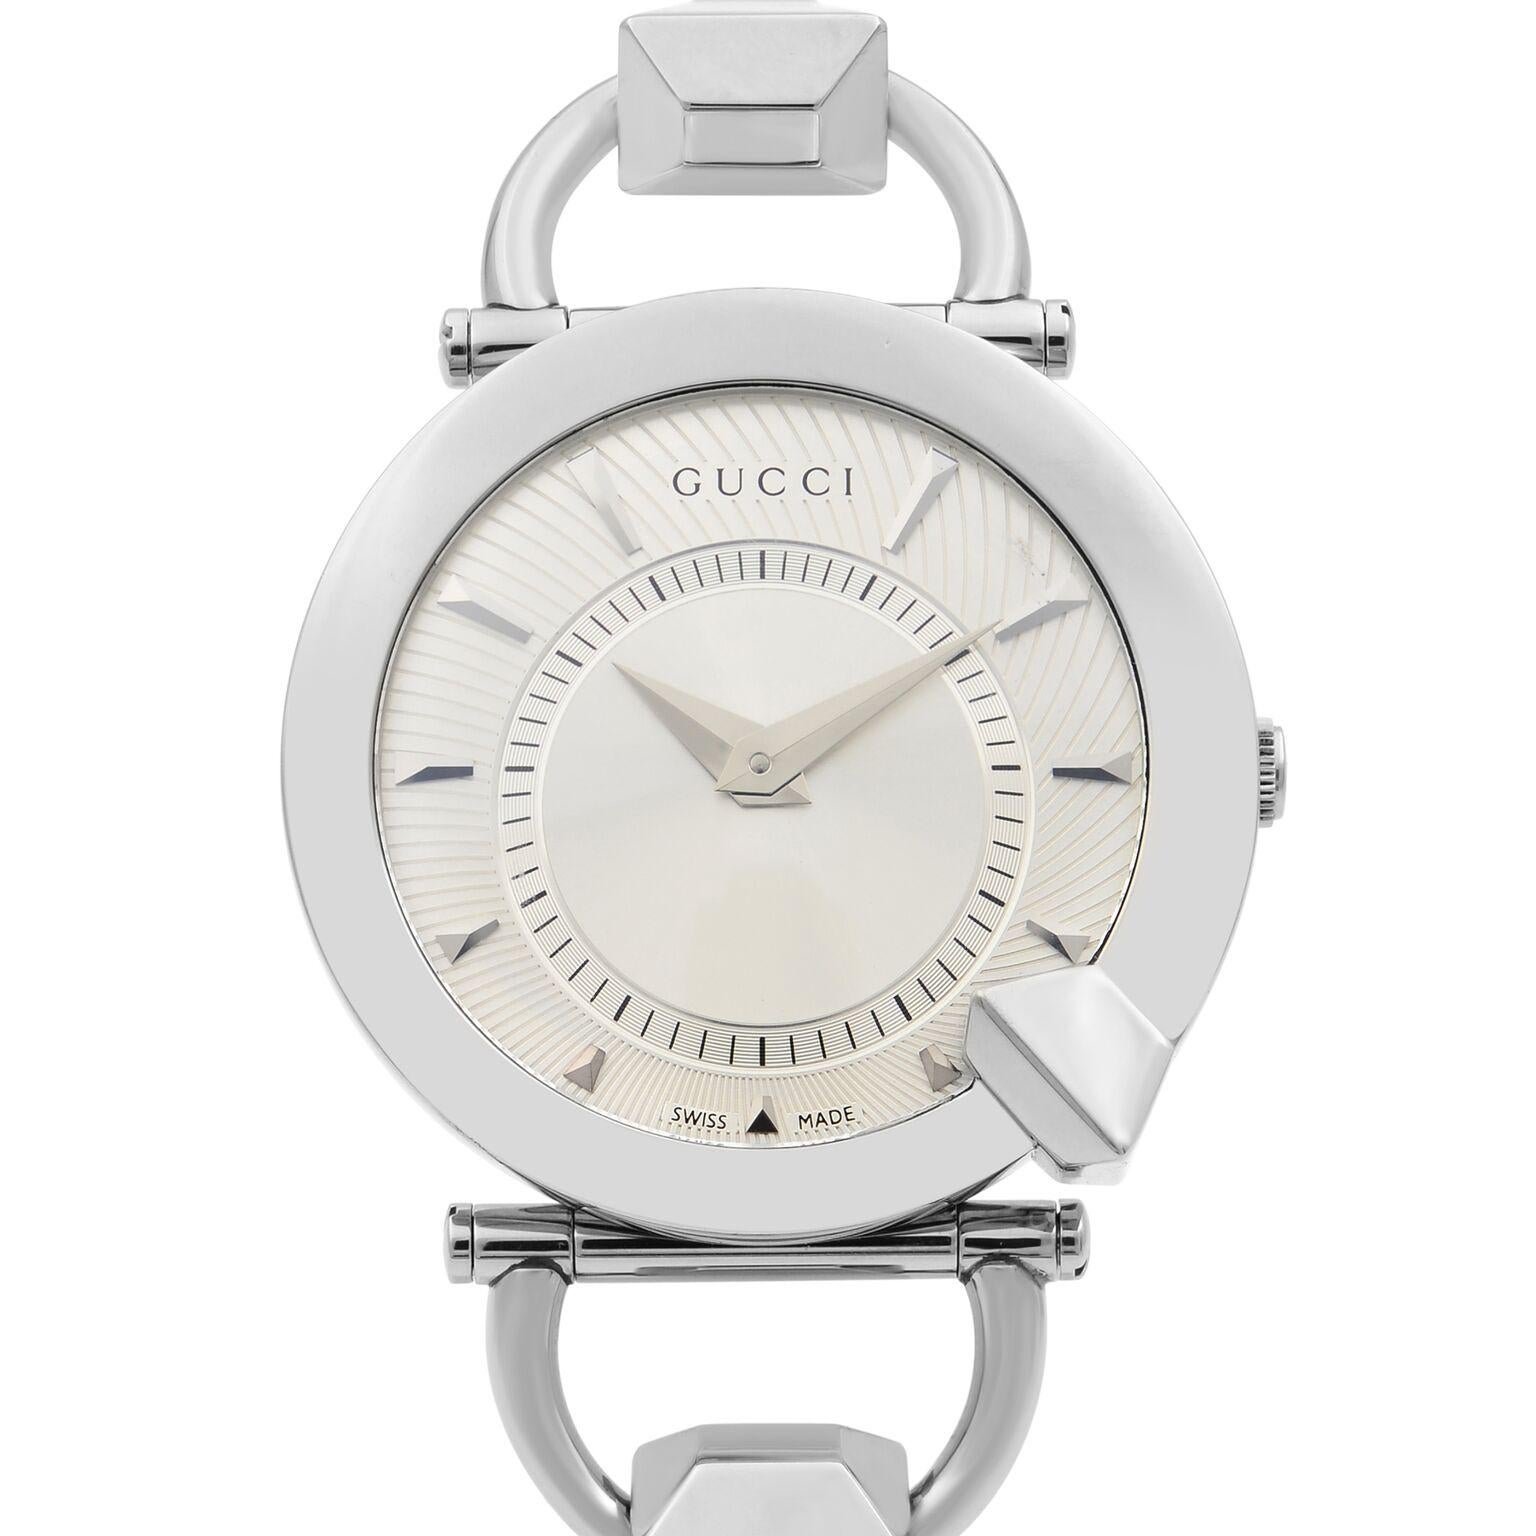 This New Without Tags Gucci Chiodo YA122508 is a beautiful Ladie's timepiece that is powered by quartz (battery) movement which is cased in a stainless steel case. It has a round shape face,  dial and has hand sticks style markers. It is completed